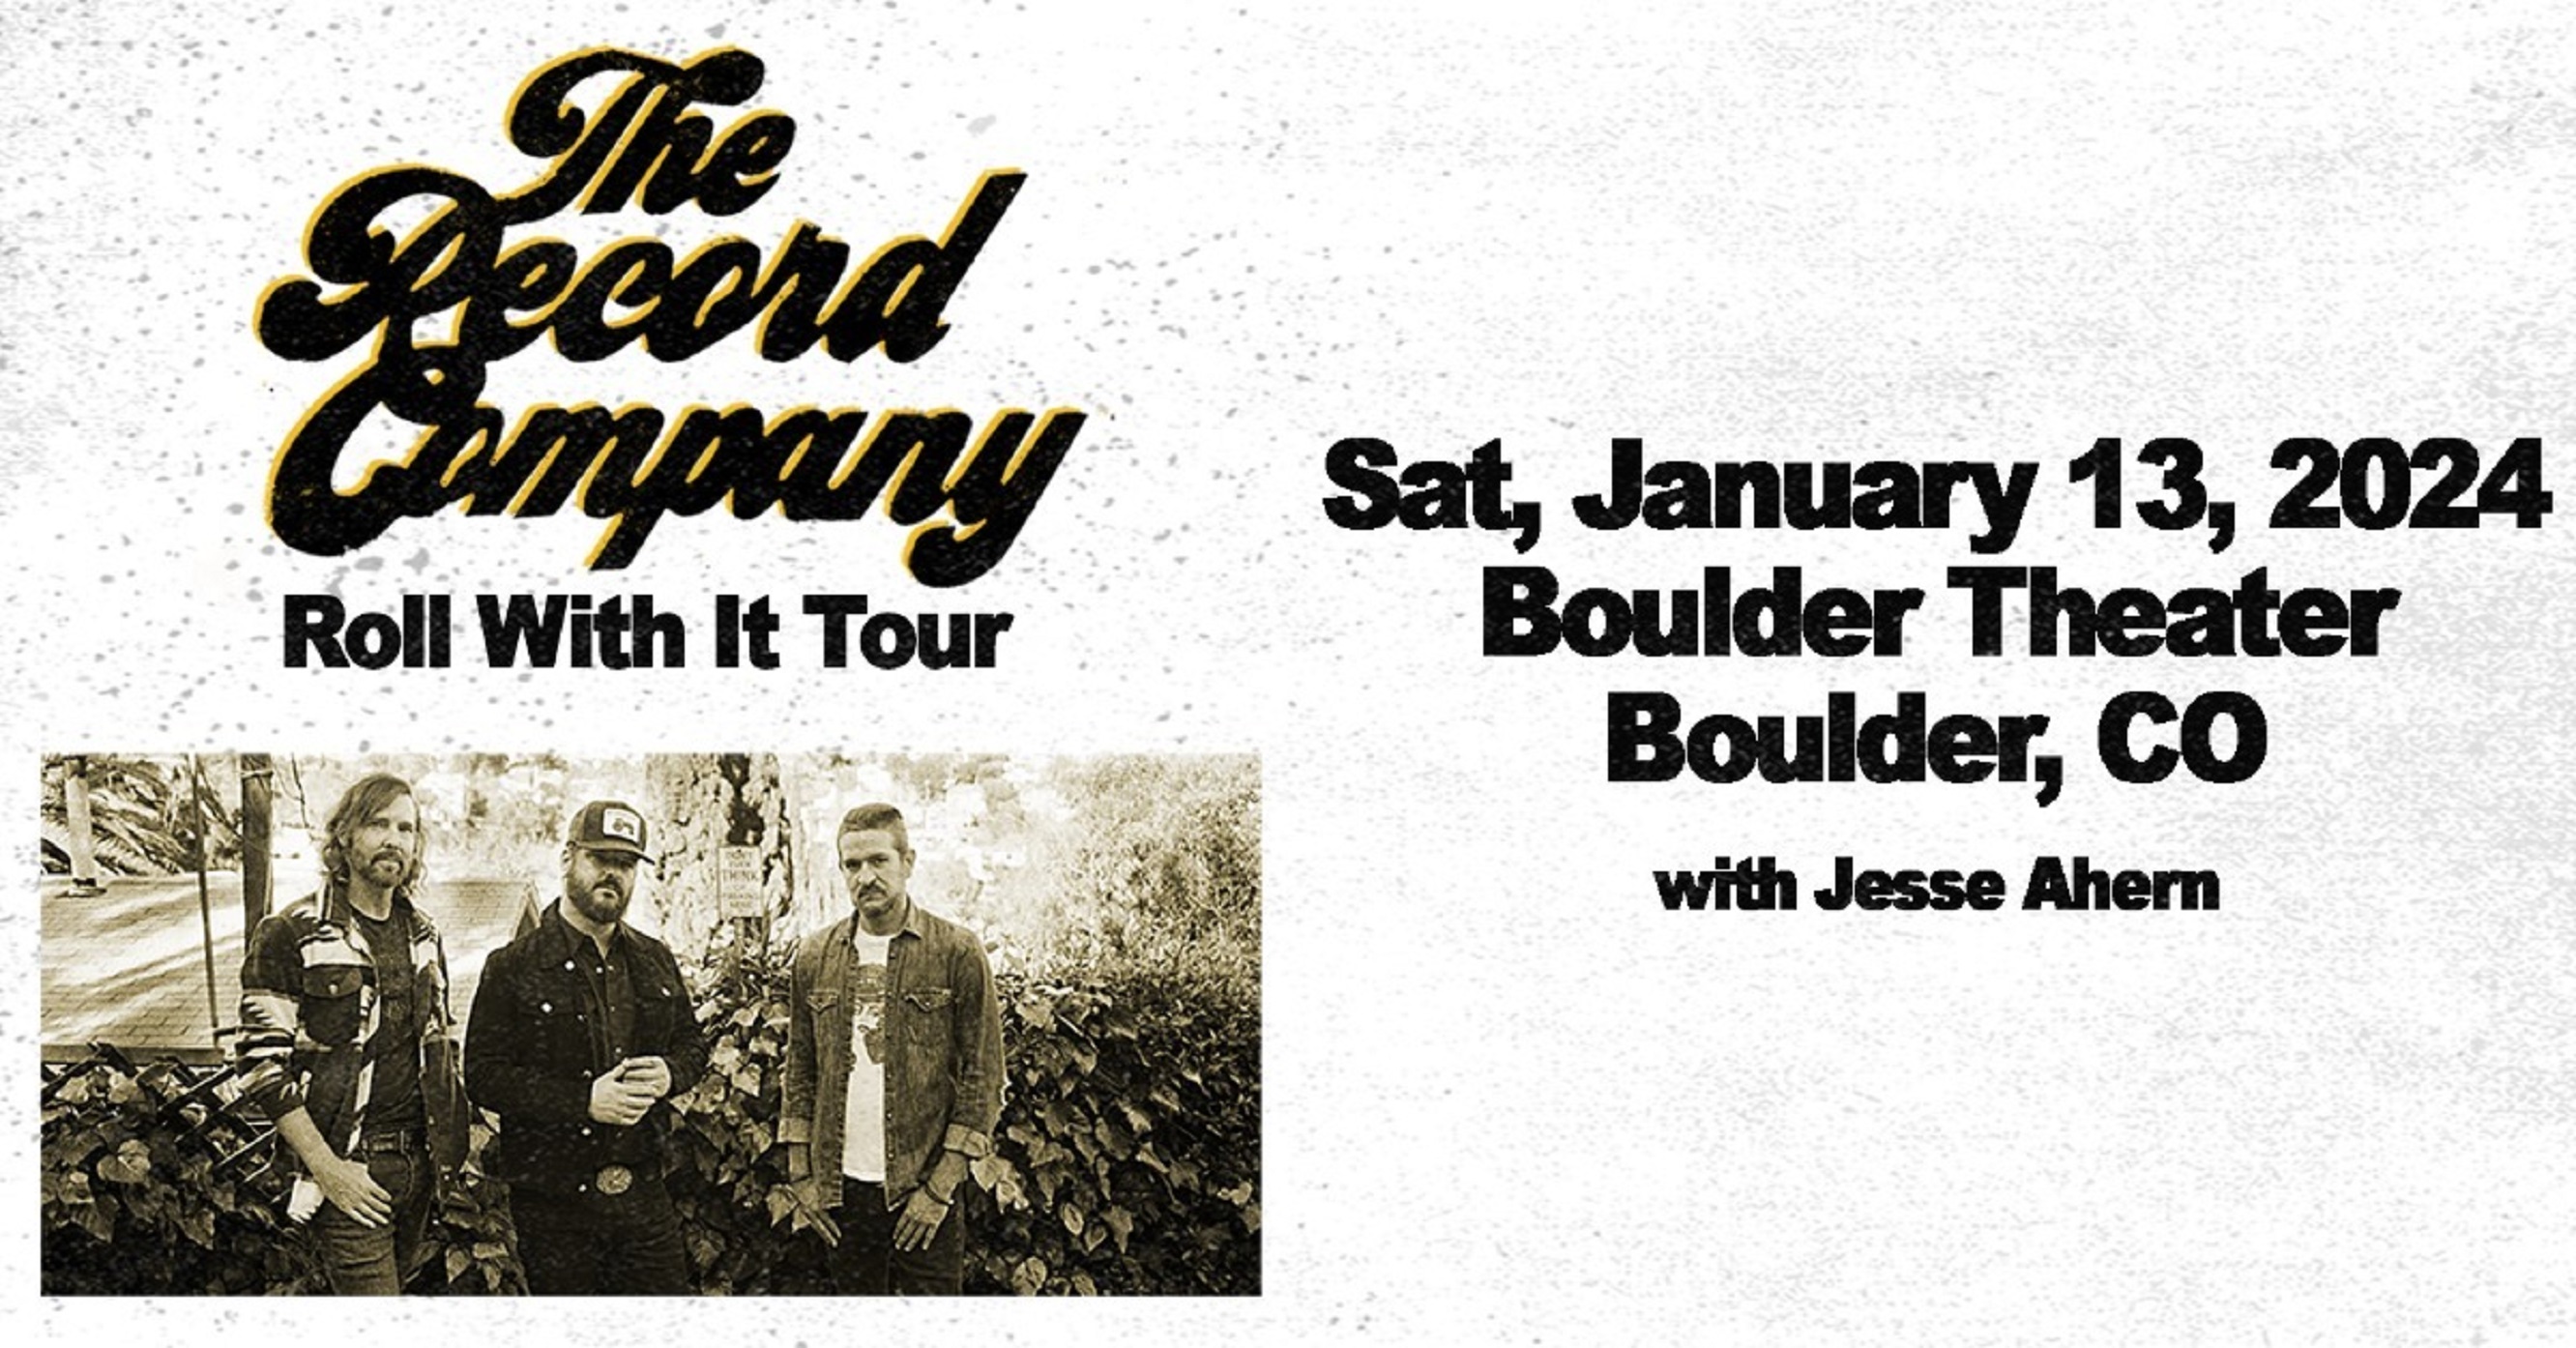 THE RECORD COMPANY ANNOUNCES "ROLL WITH IT" TOUR - BOULDER THEATER PERFORMANCE SCHEDULED FOR JANUARY 13, 2024